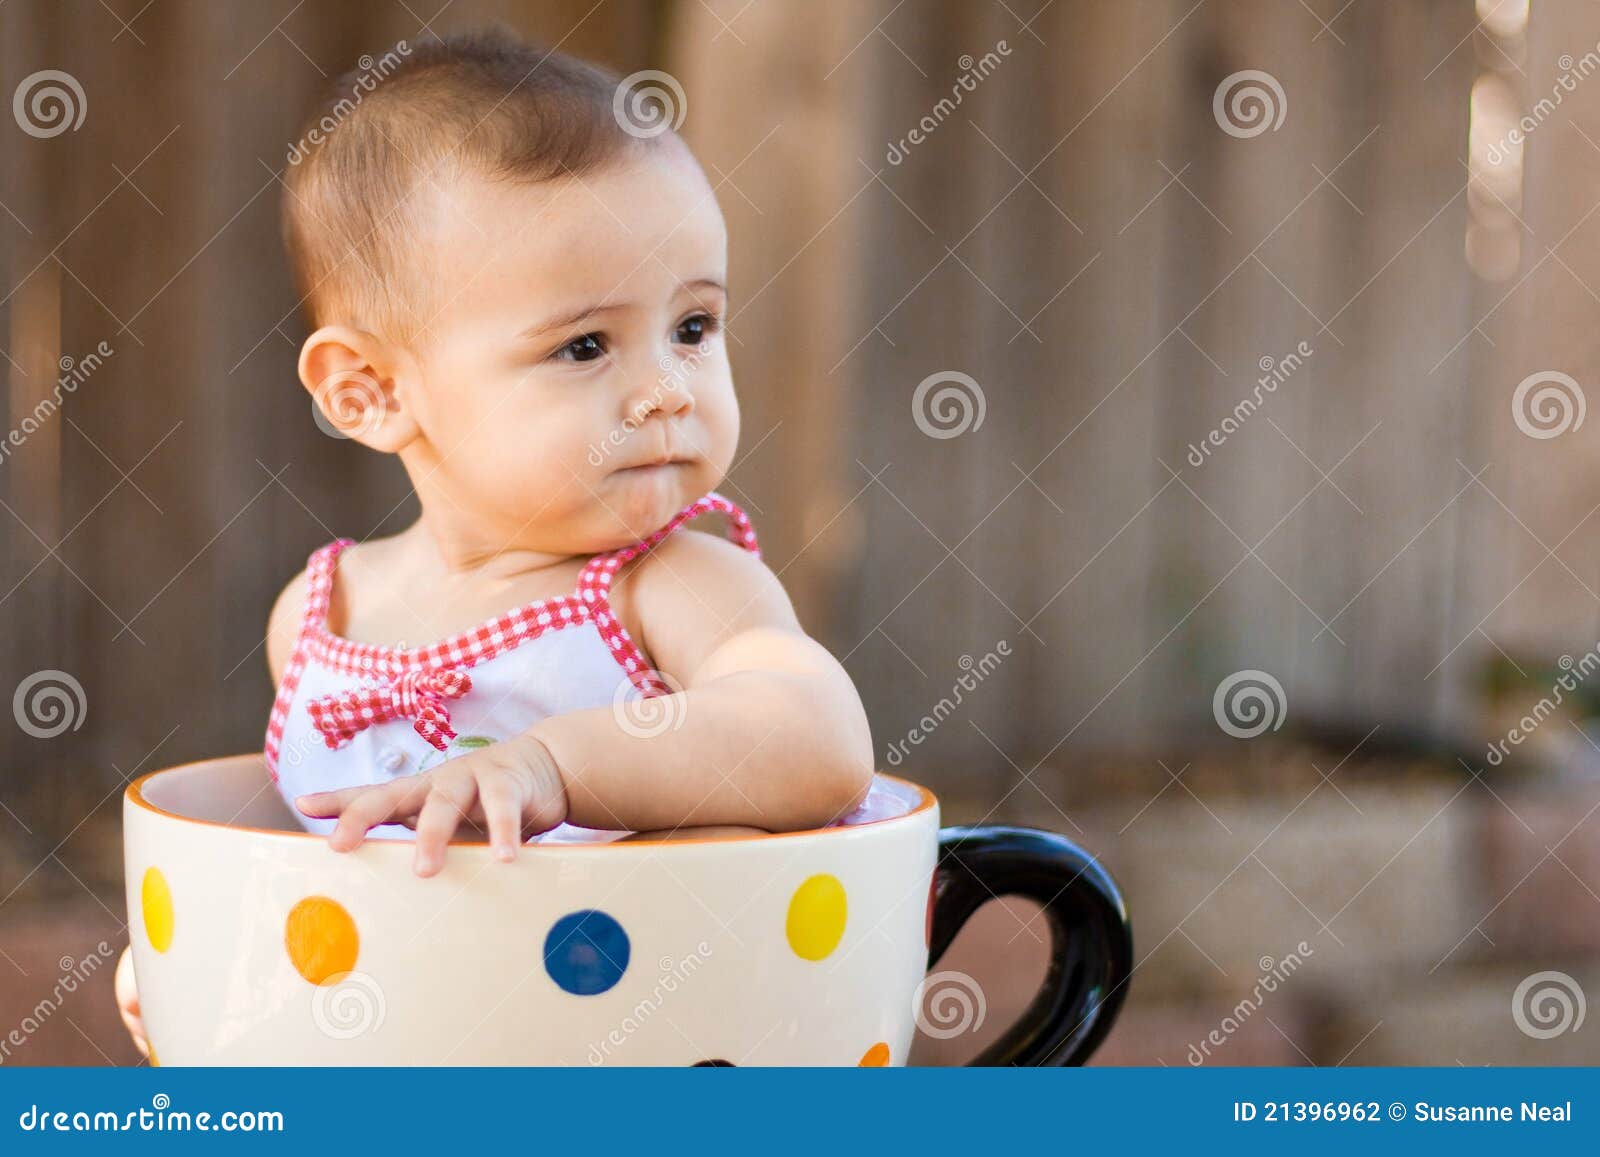 Closeup Of Baby Girl In Giant Teacup Stock Photo - Image 